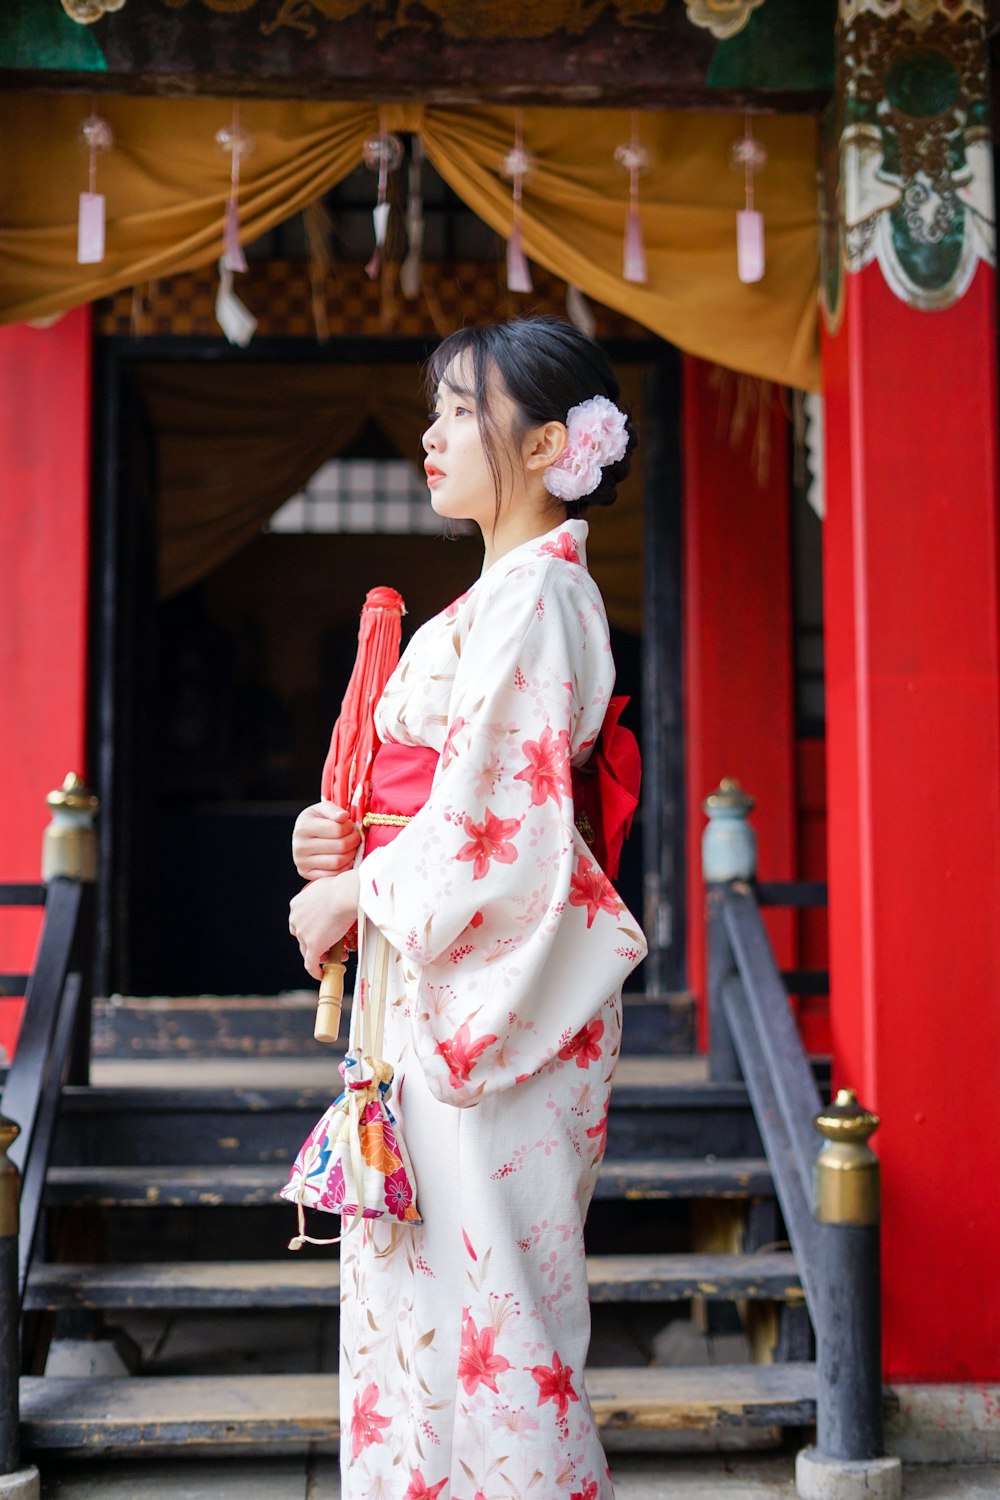 woman in white and pink floral kimono holding red umbrella